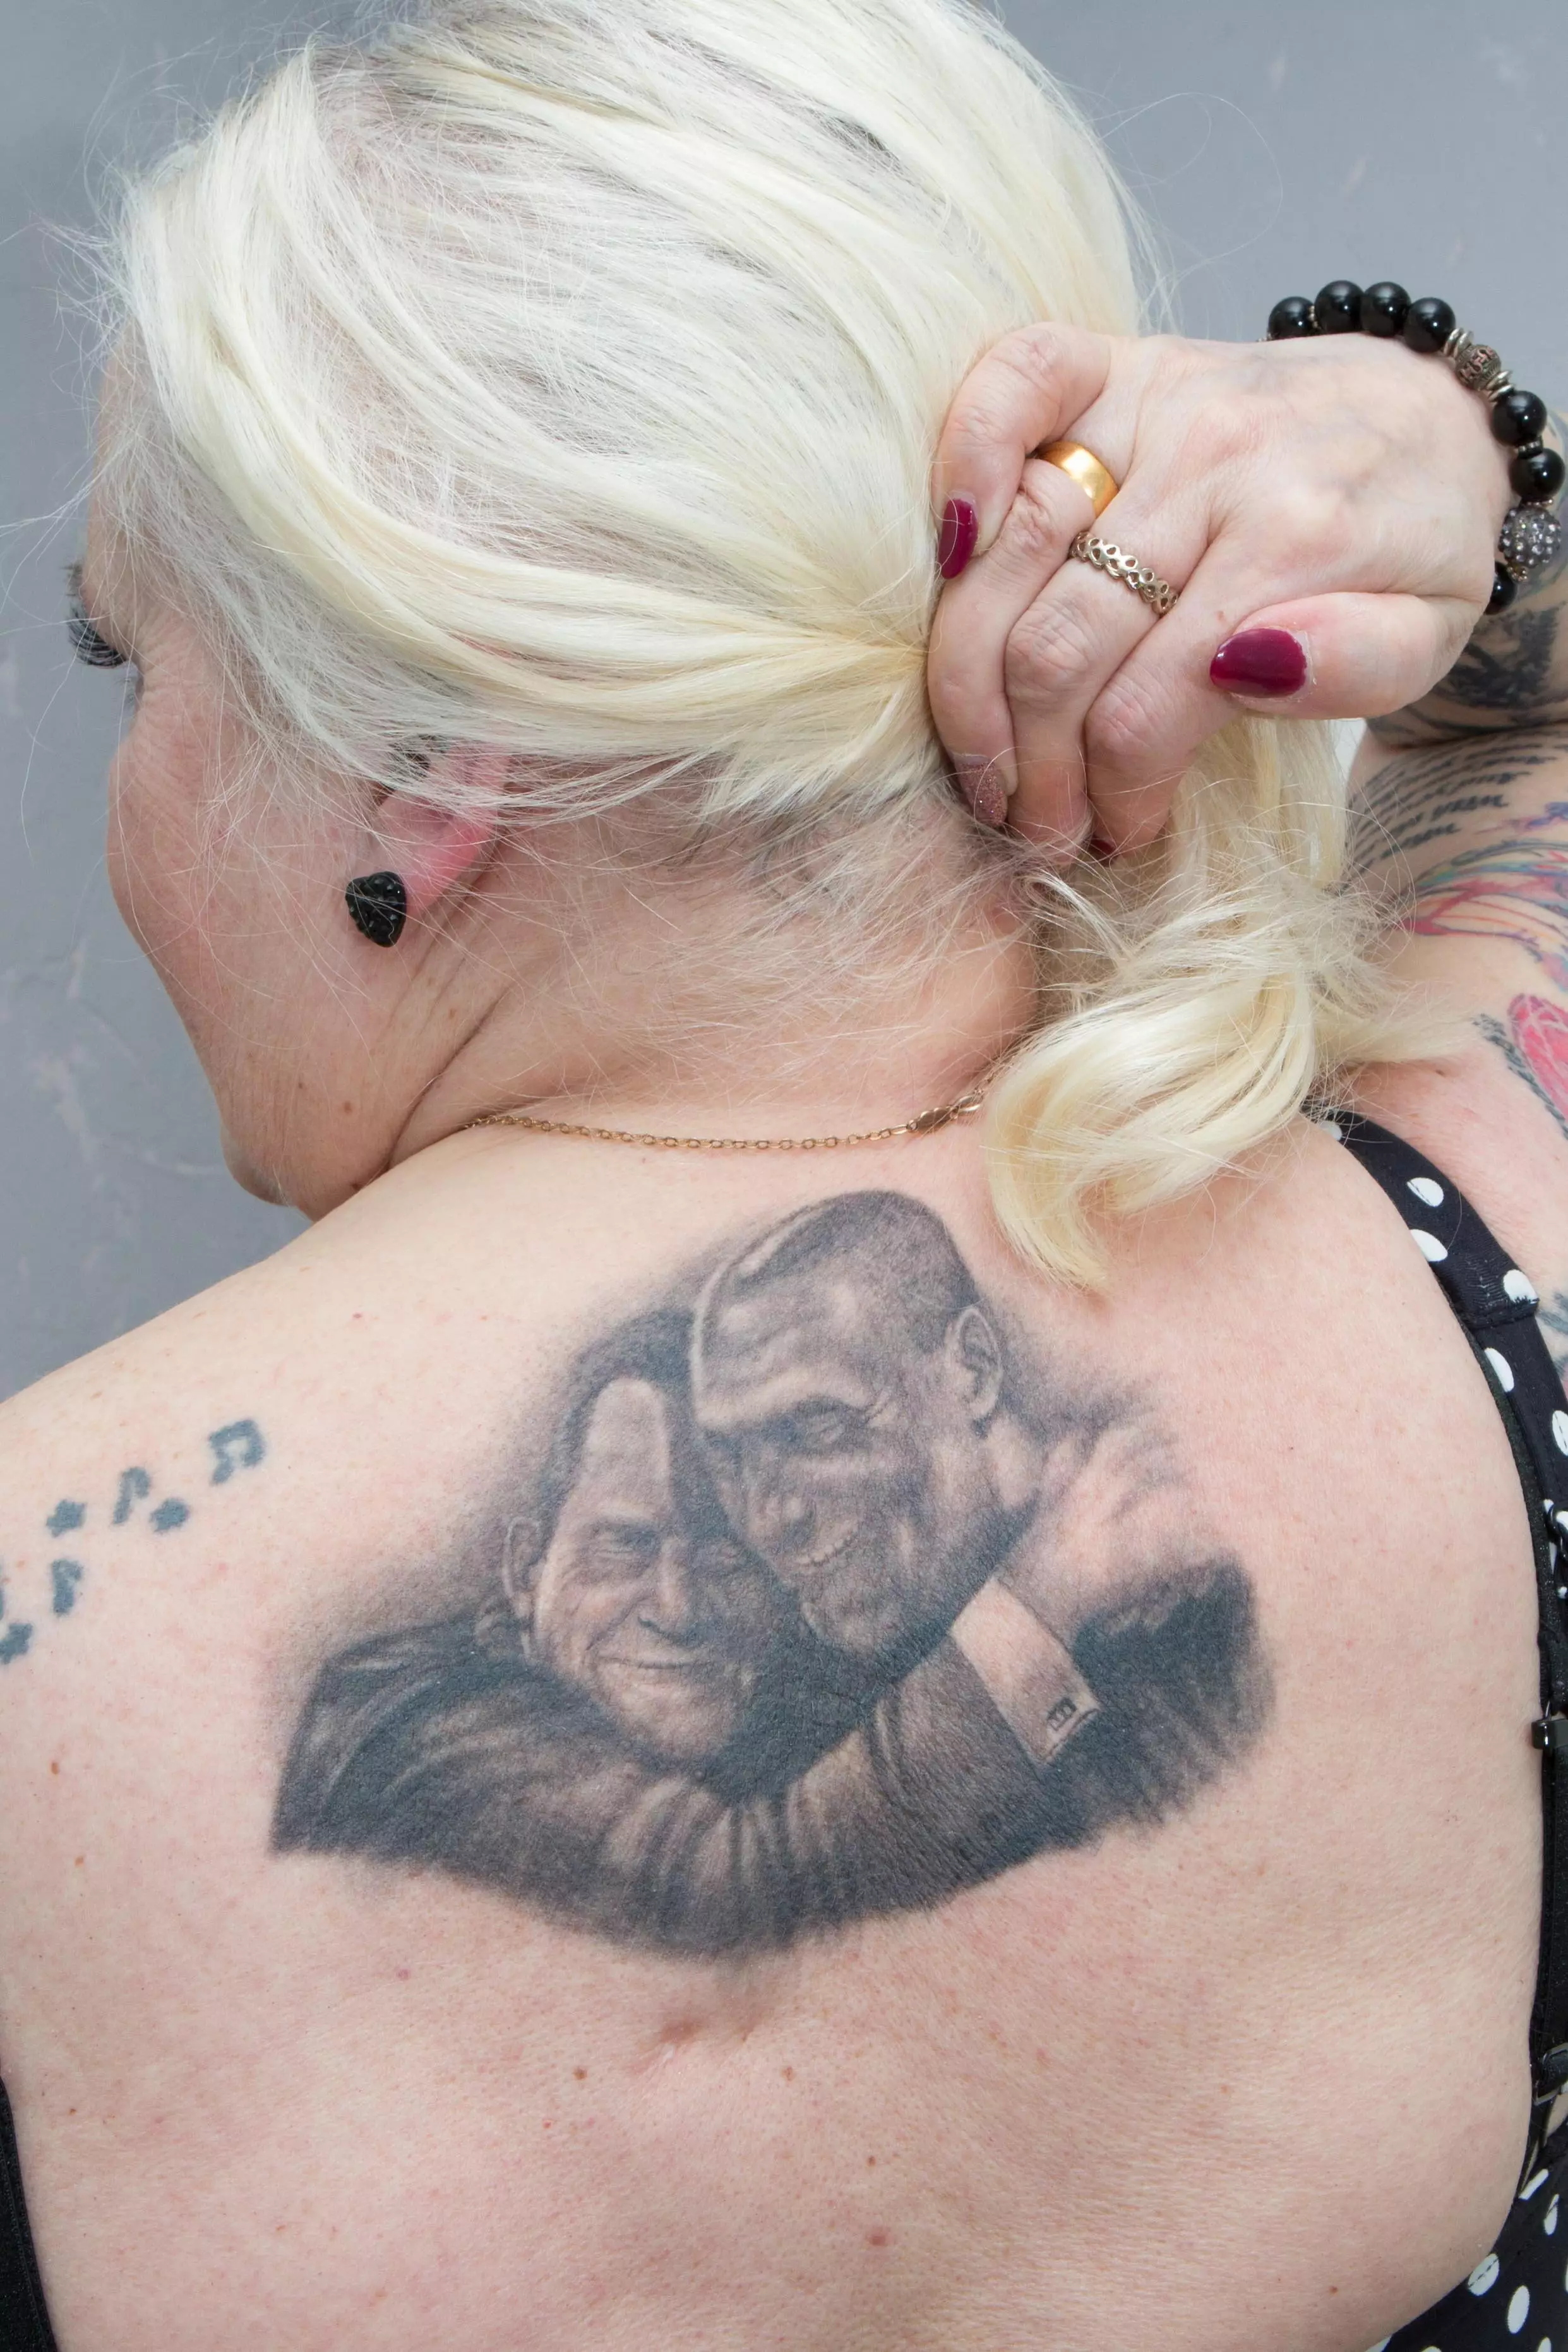 The gran has added to her collection of tats with one of Jeremy Kyle and Steve.